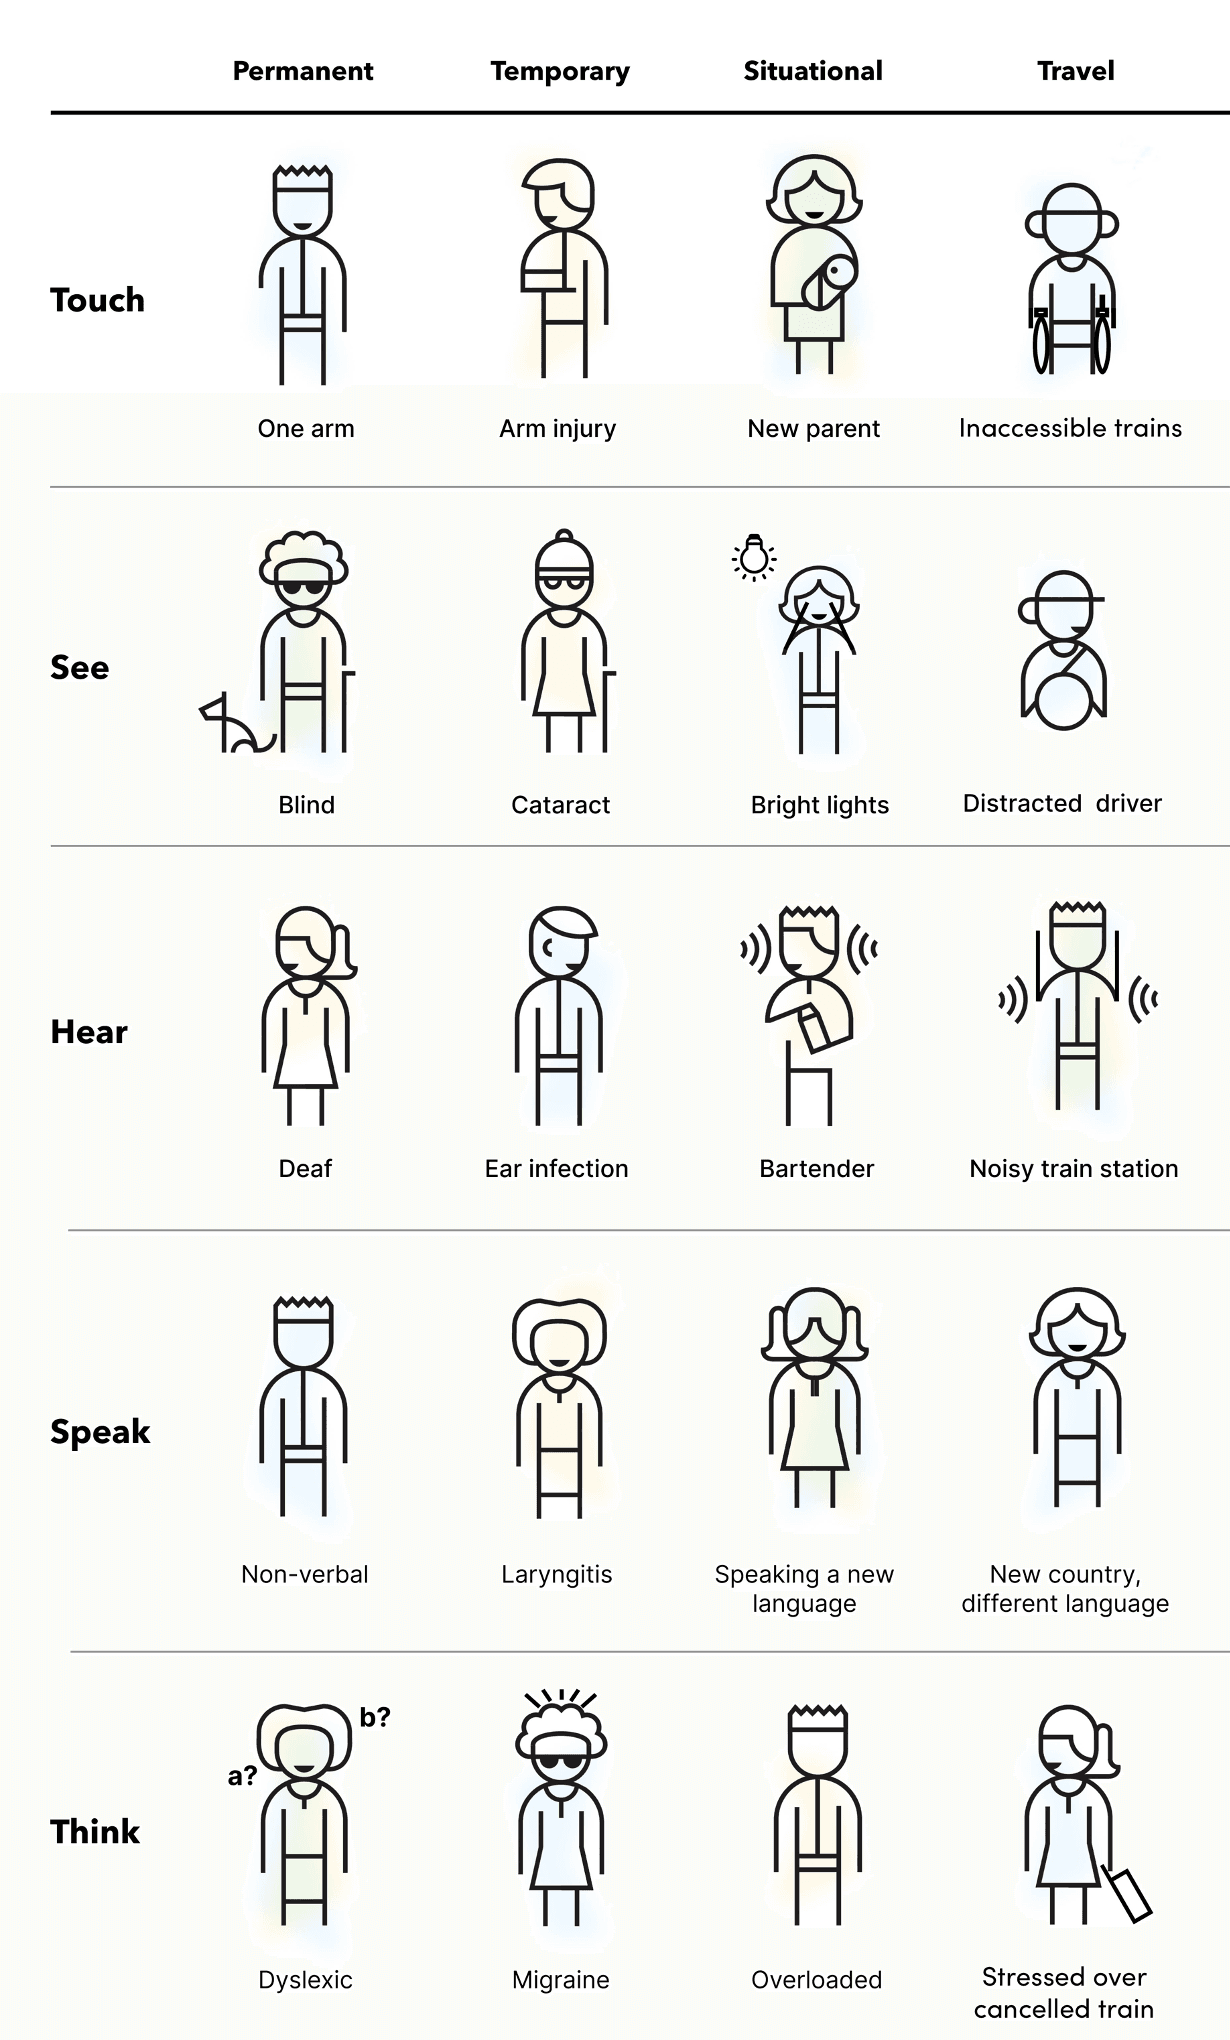 Illustration of icons representing the five senses, with each sense divided into four specific states or types.